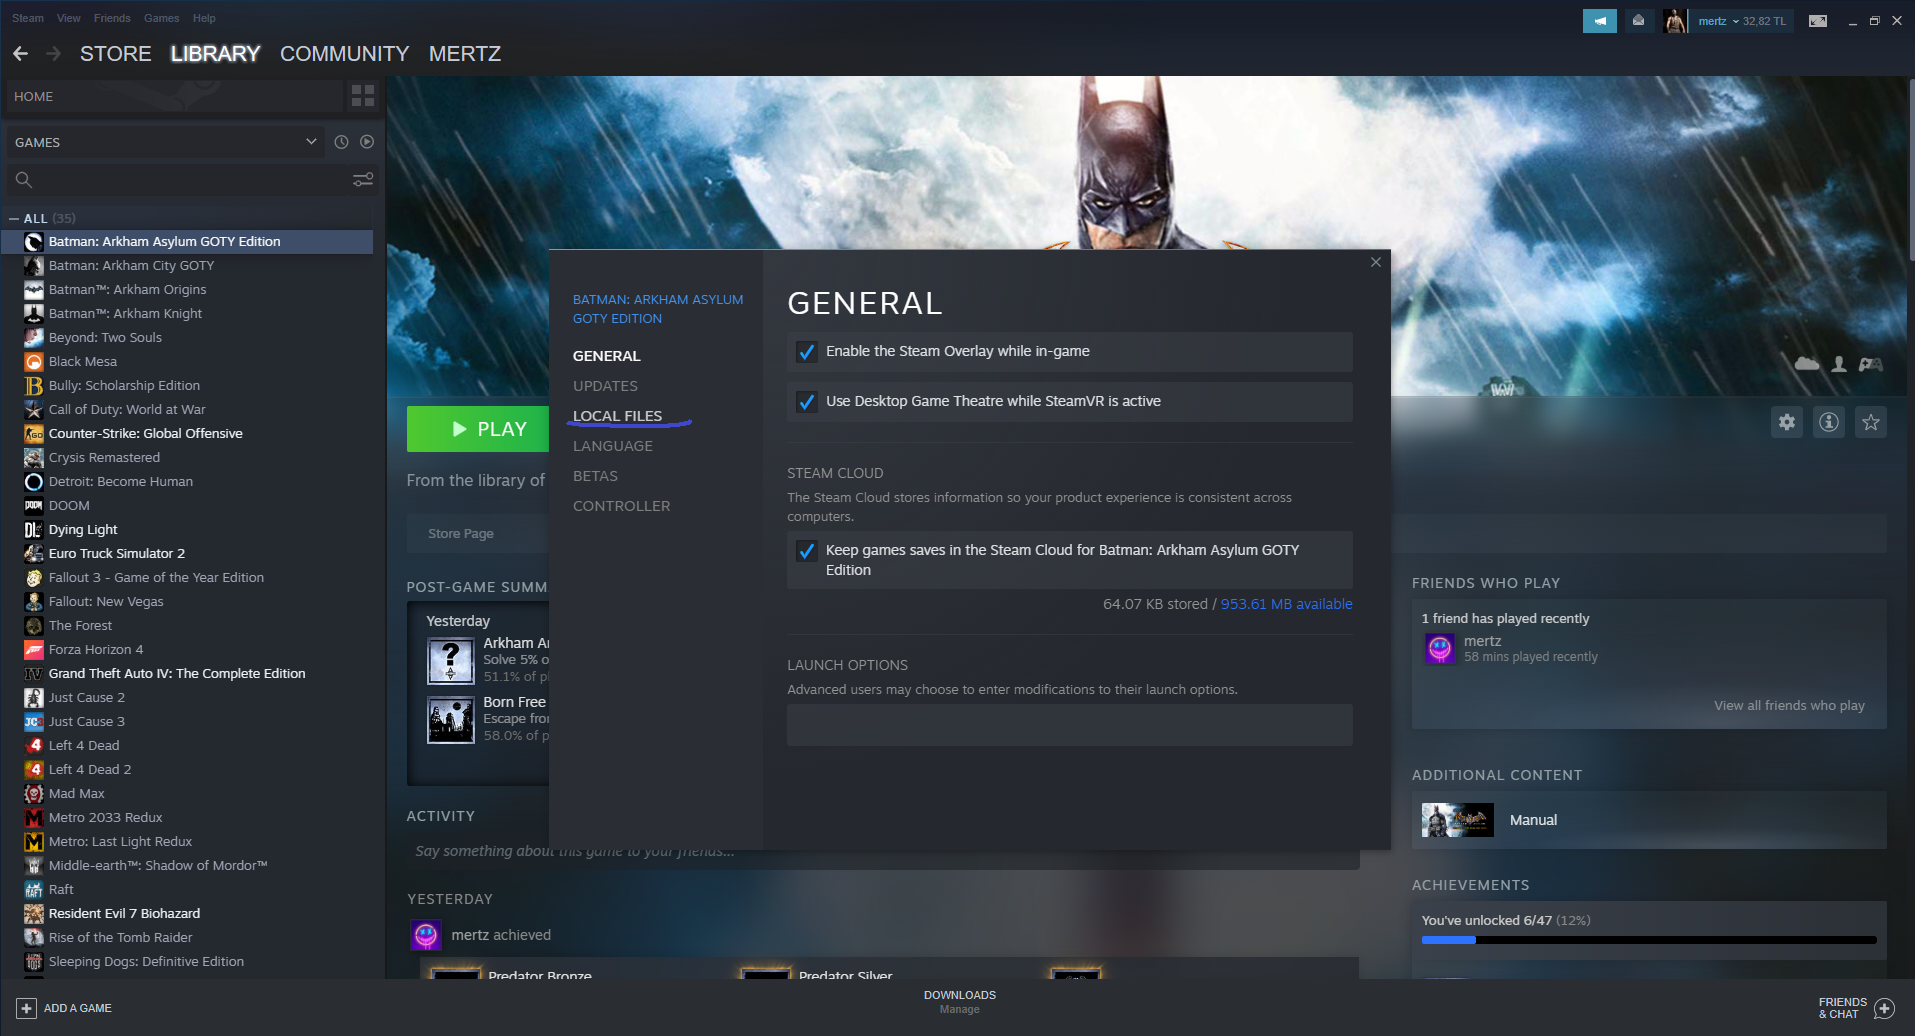 Batman: Arkham Asylum GOTY Edition How to unlock 62 Fps limit guide - Open the file location of the game - A3A5968